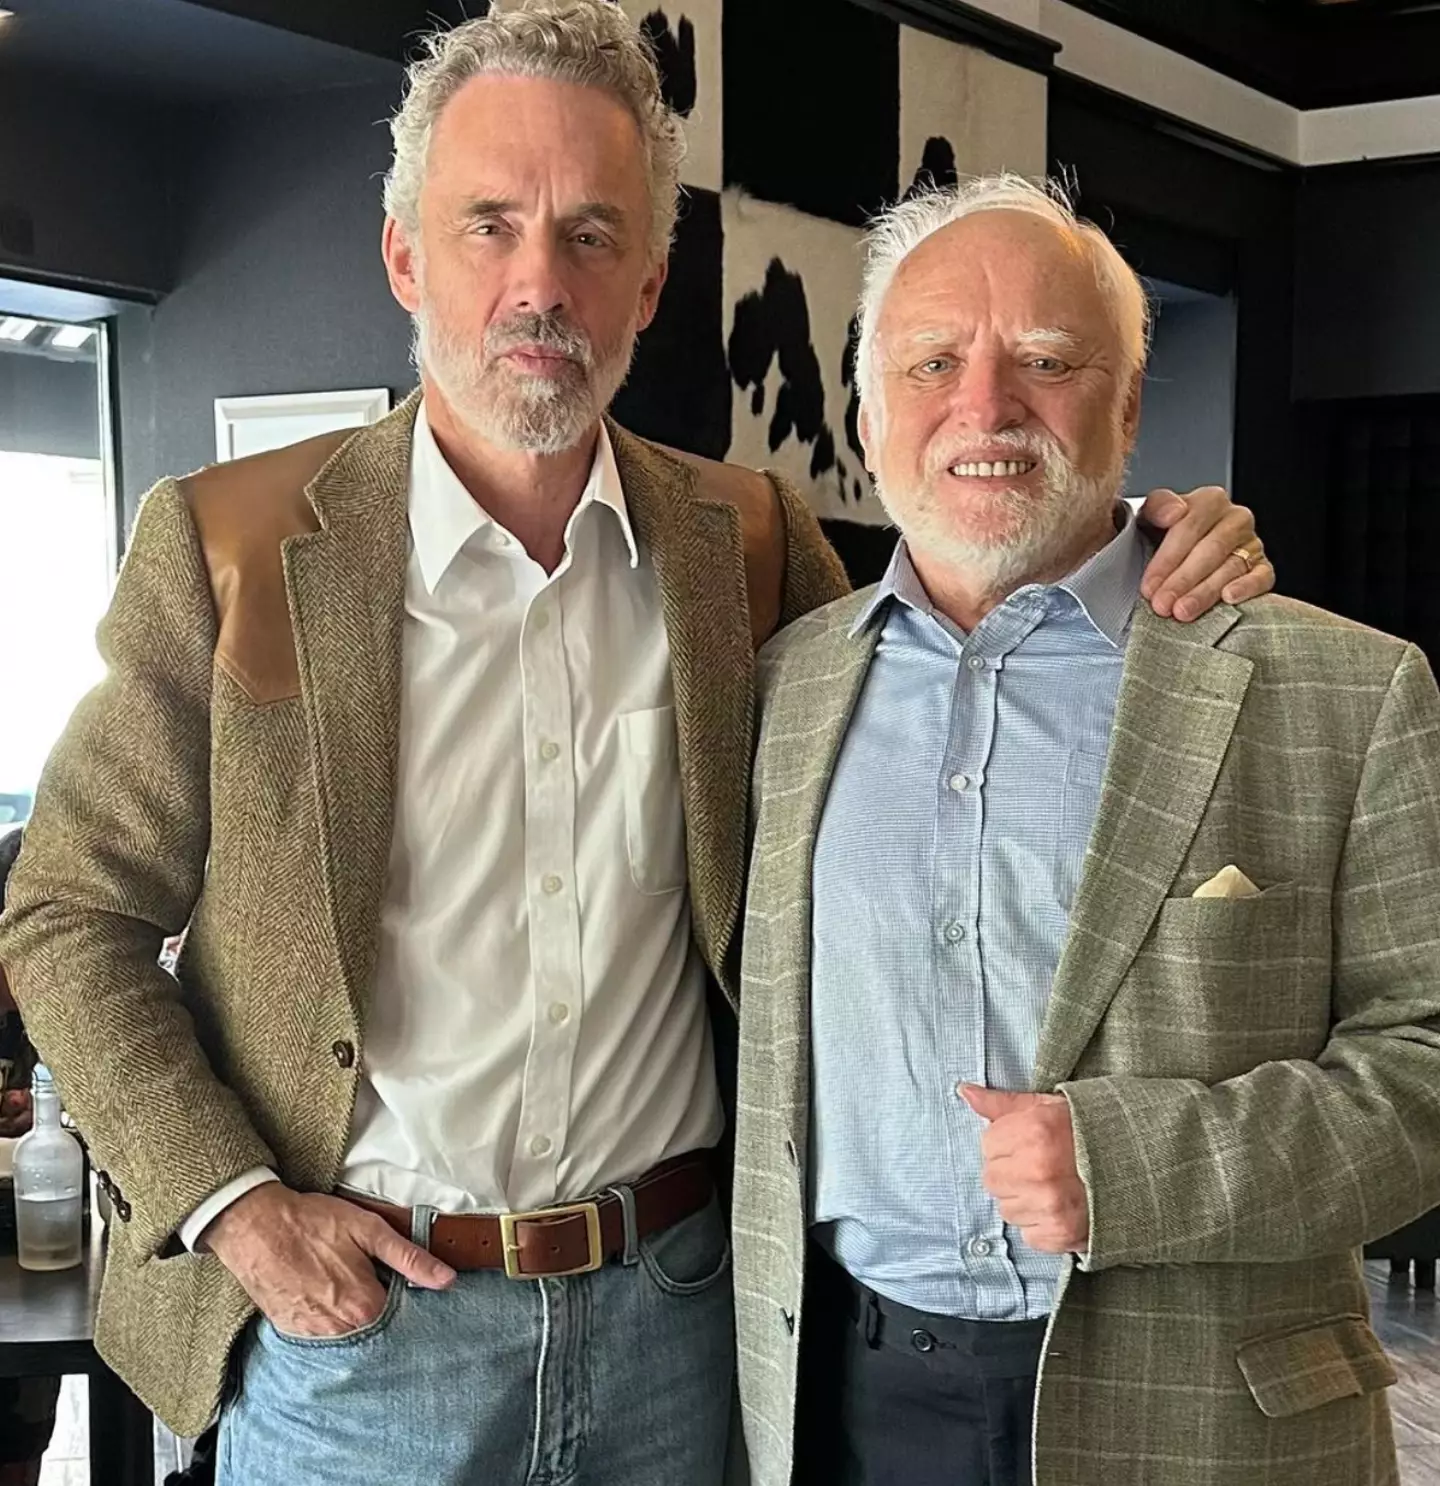 Jordan Peterson and Hide The Pain Harold shocked the internet.